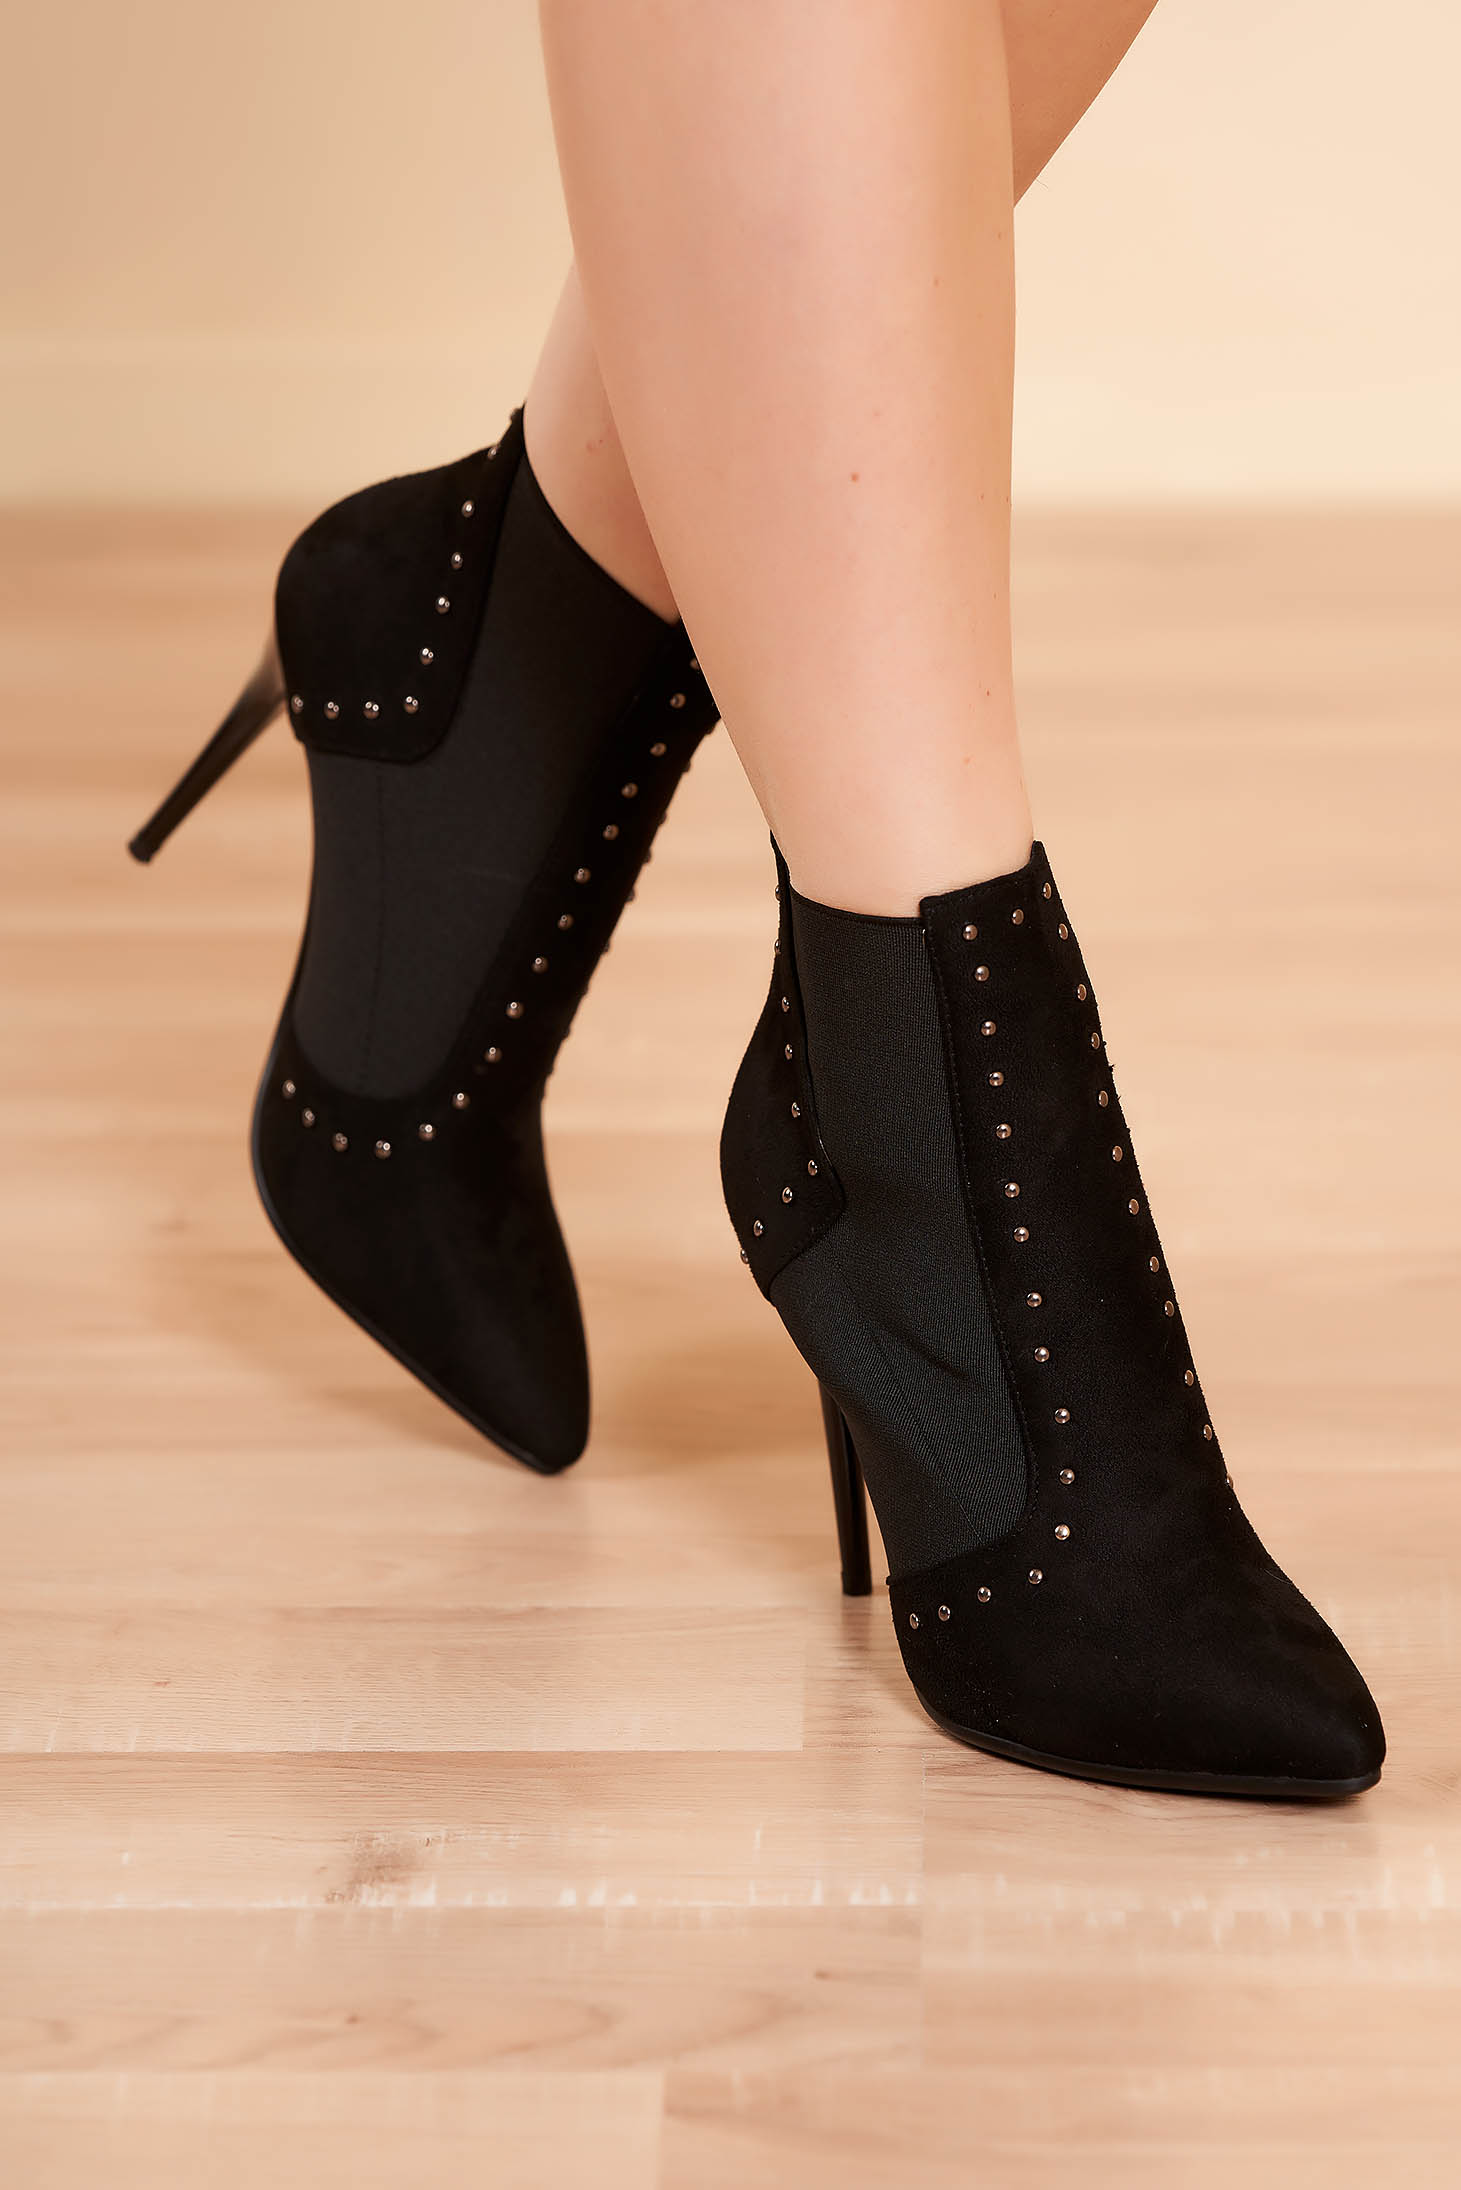 Ankle Boots Black Elegant From Ecological Leather With High Heels